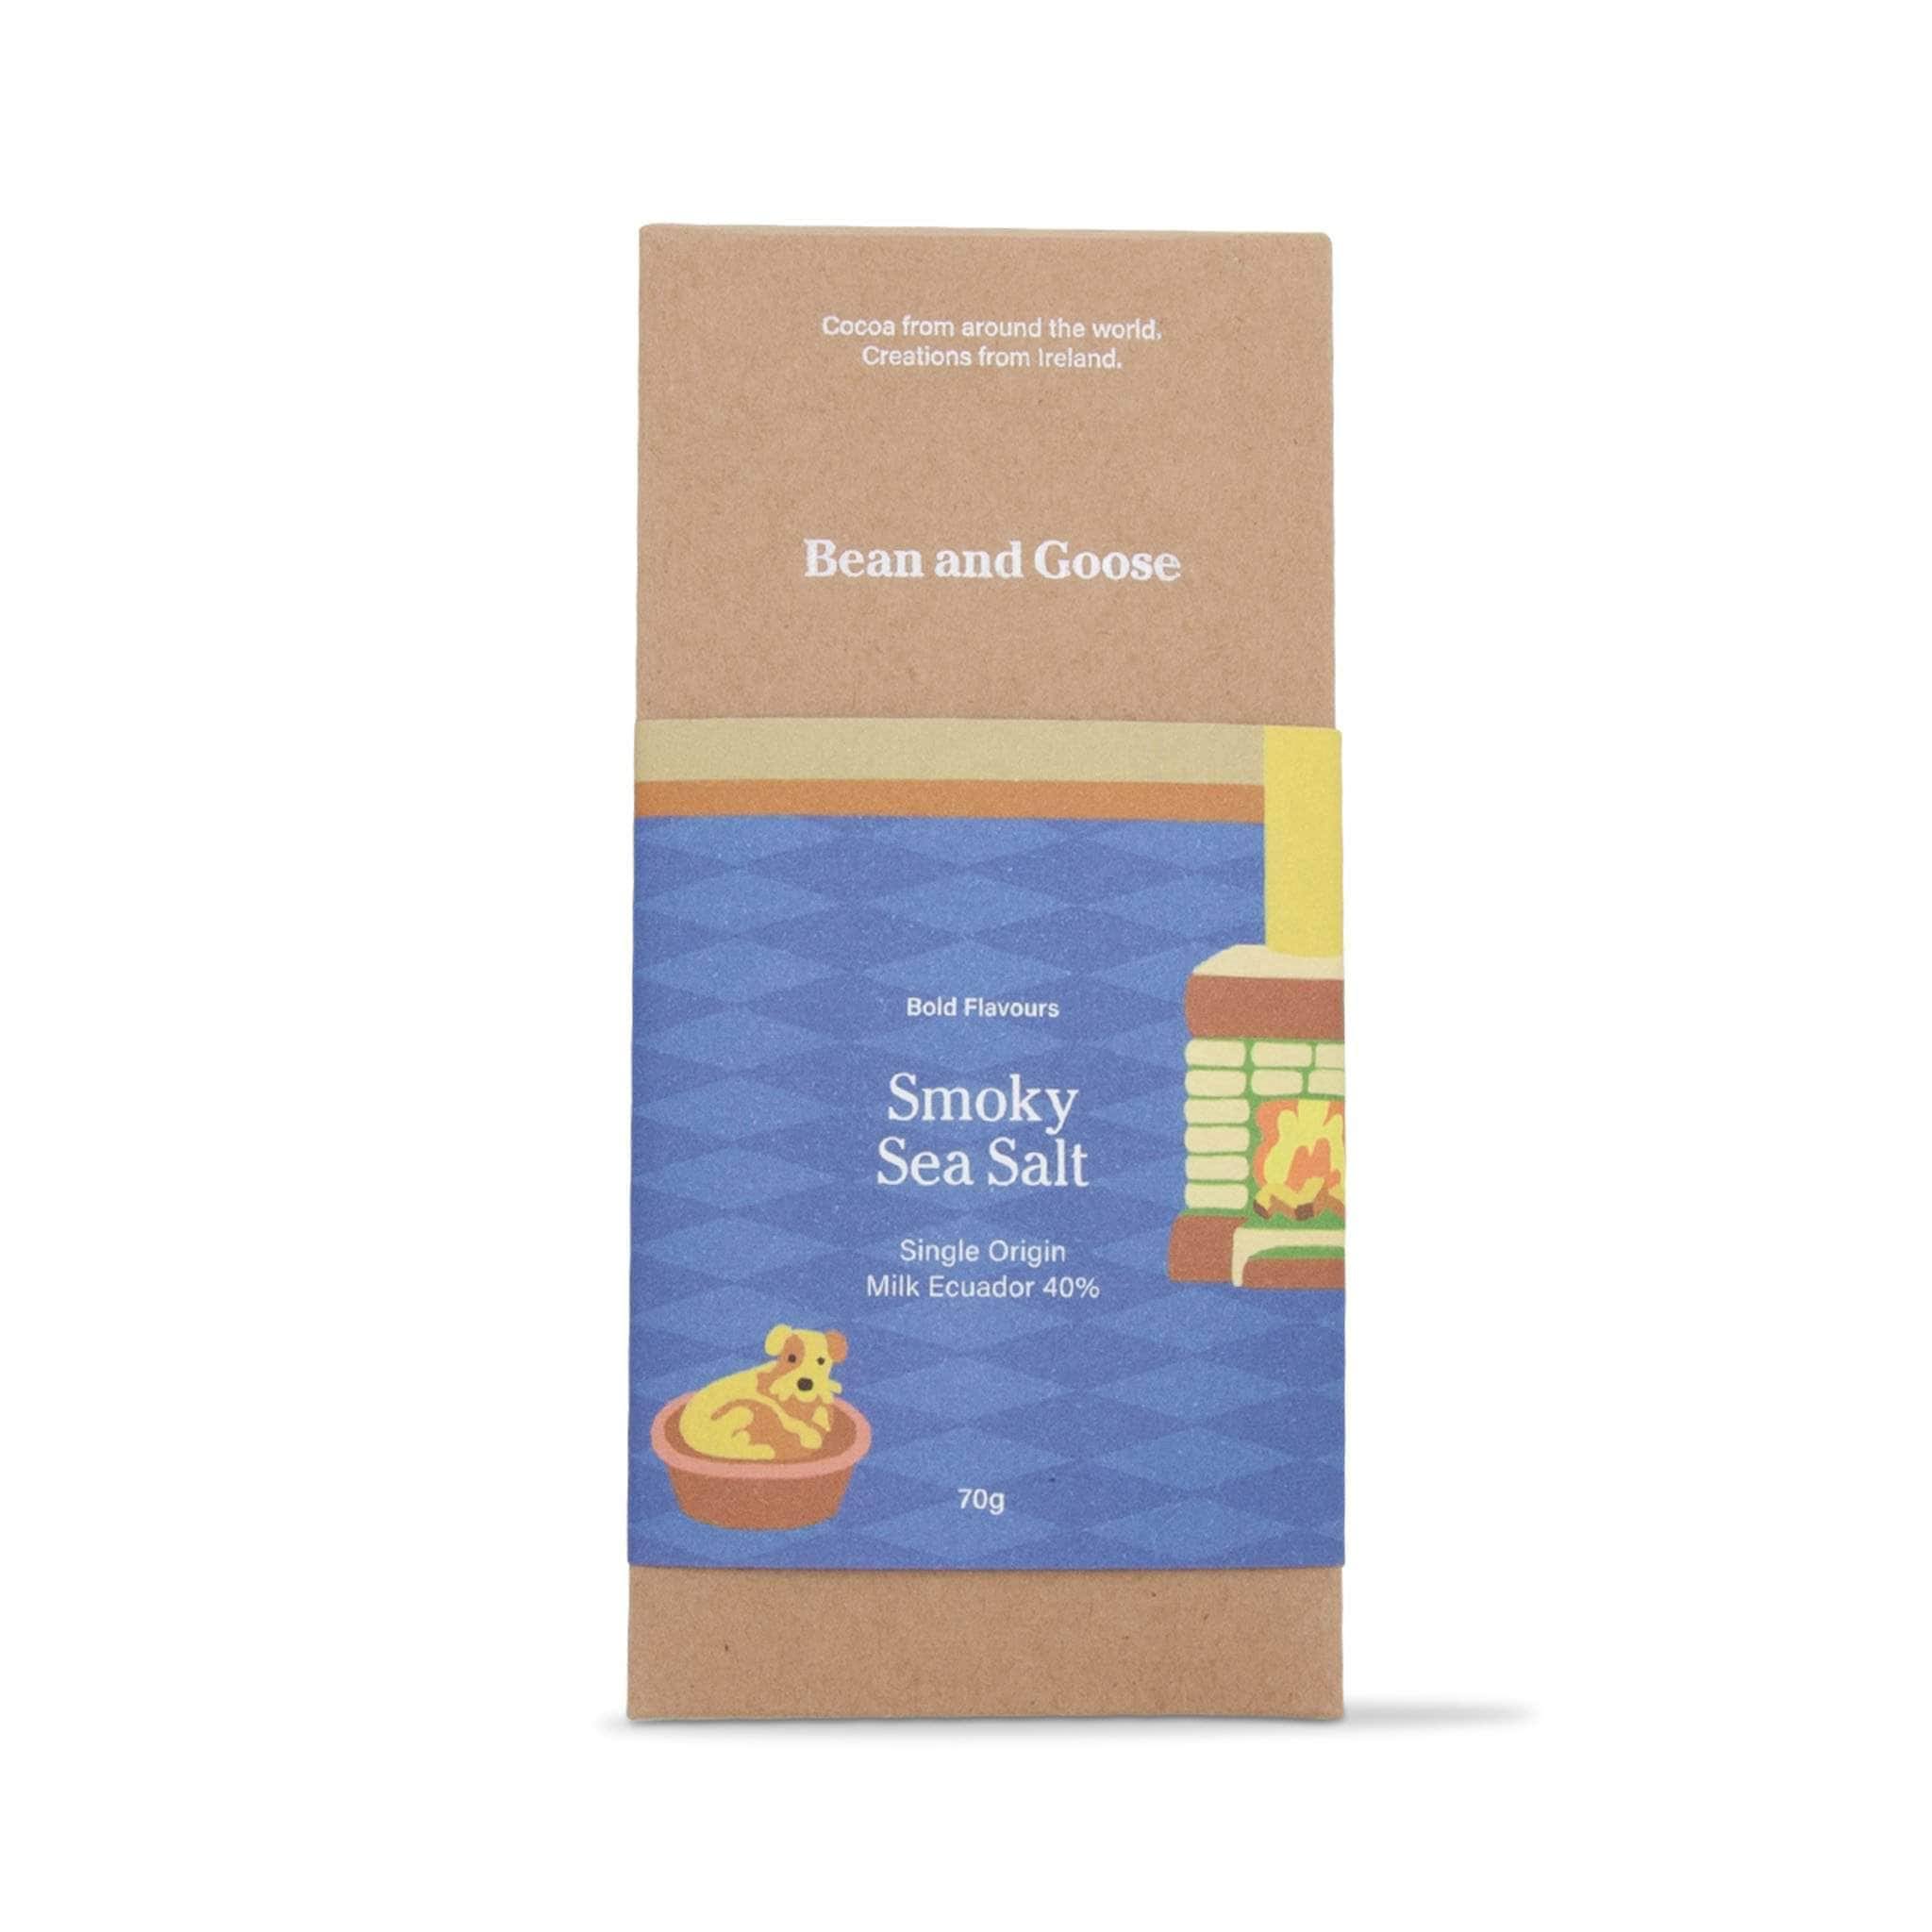 Bean and Goose Sour Cherry Orchard Dark Chocolate Bar